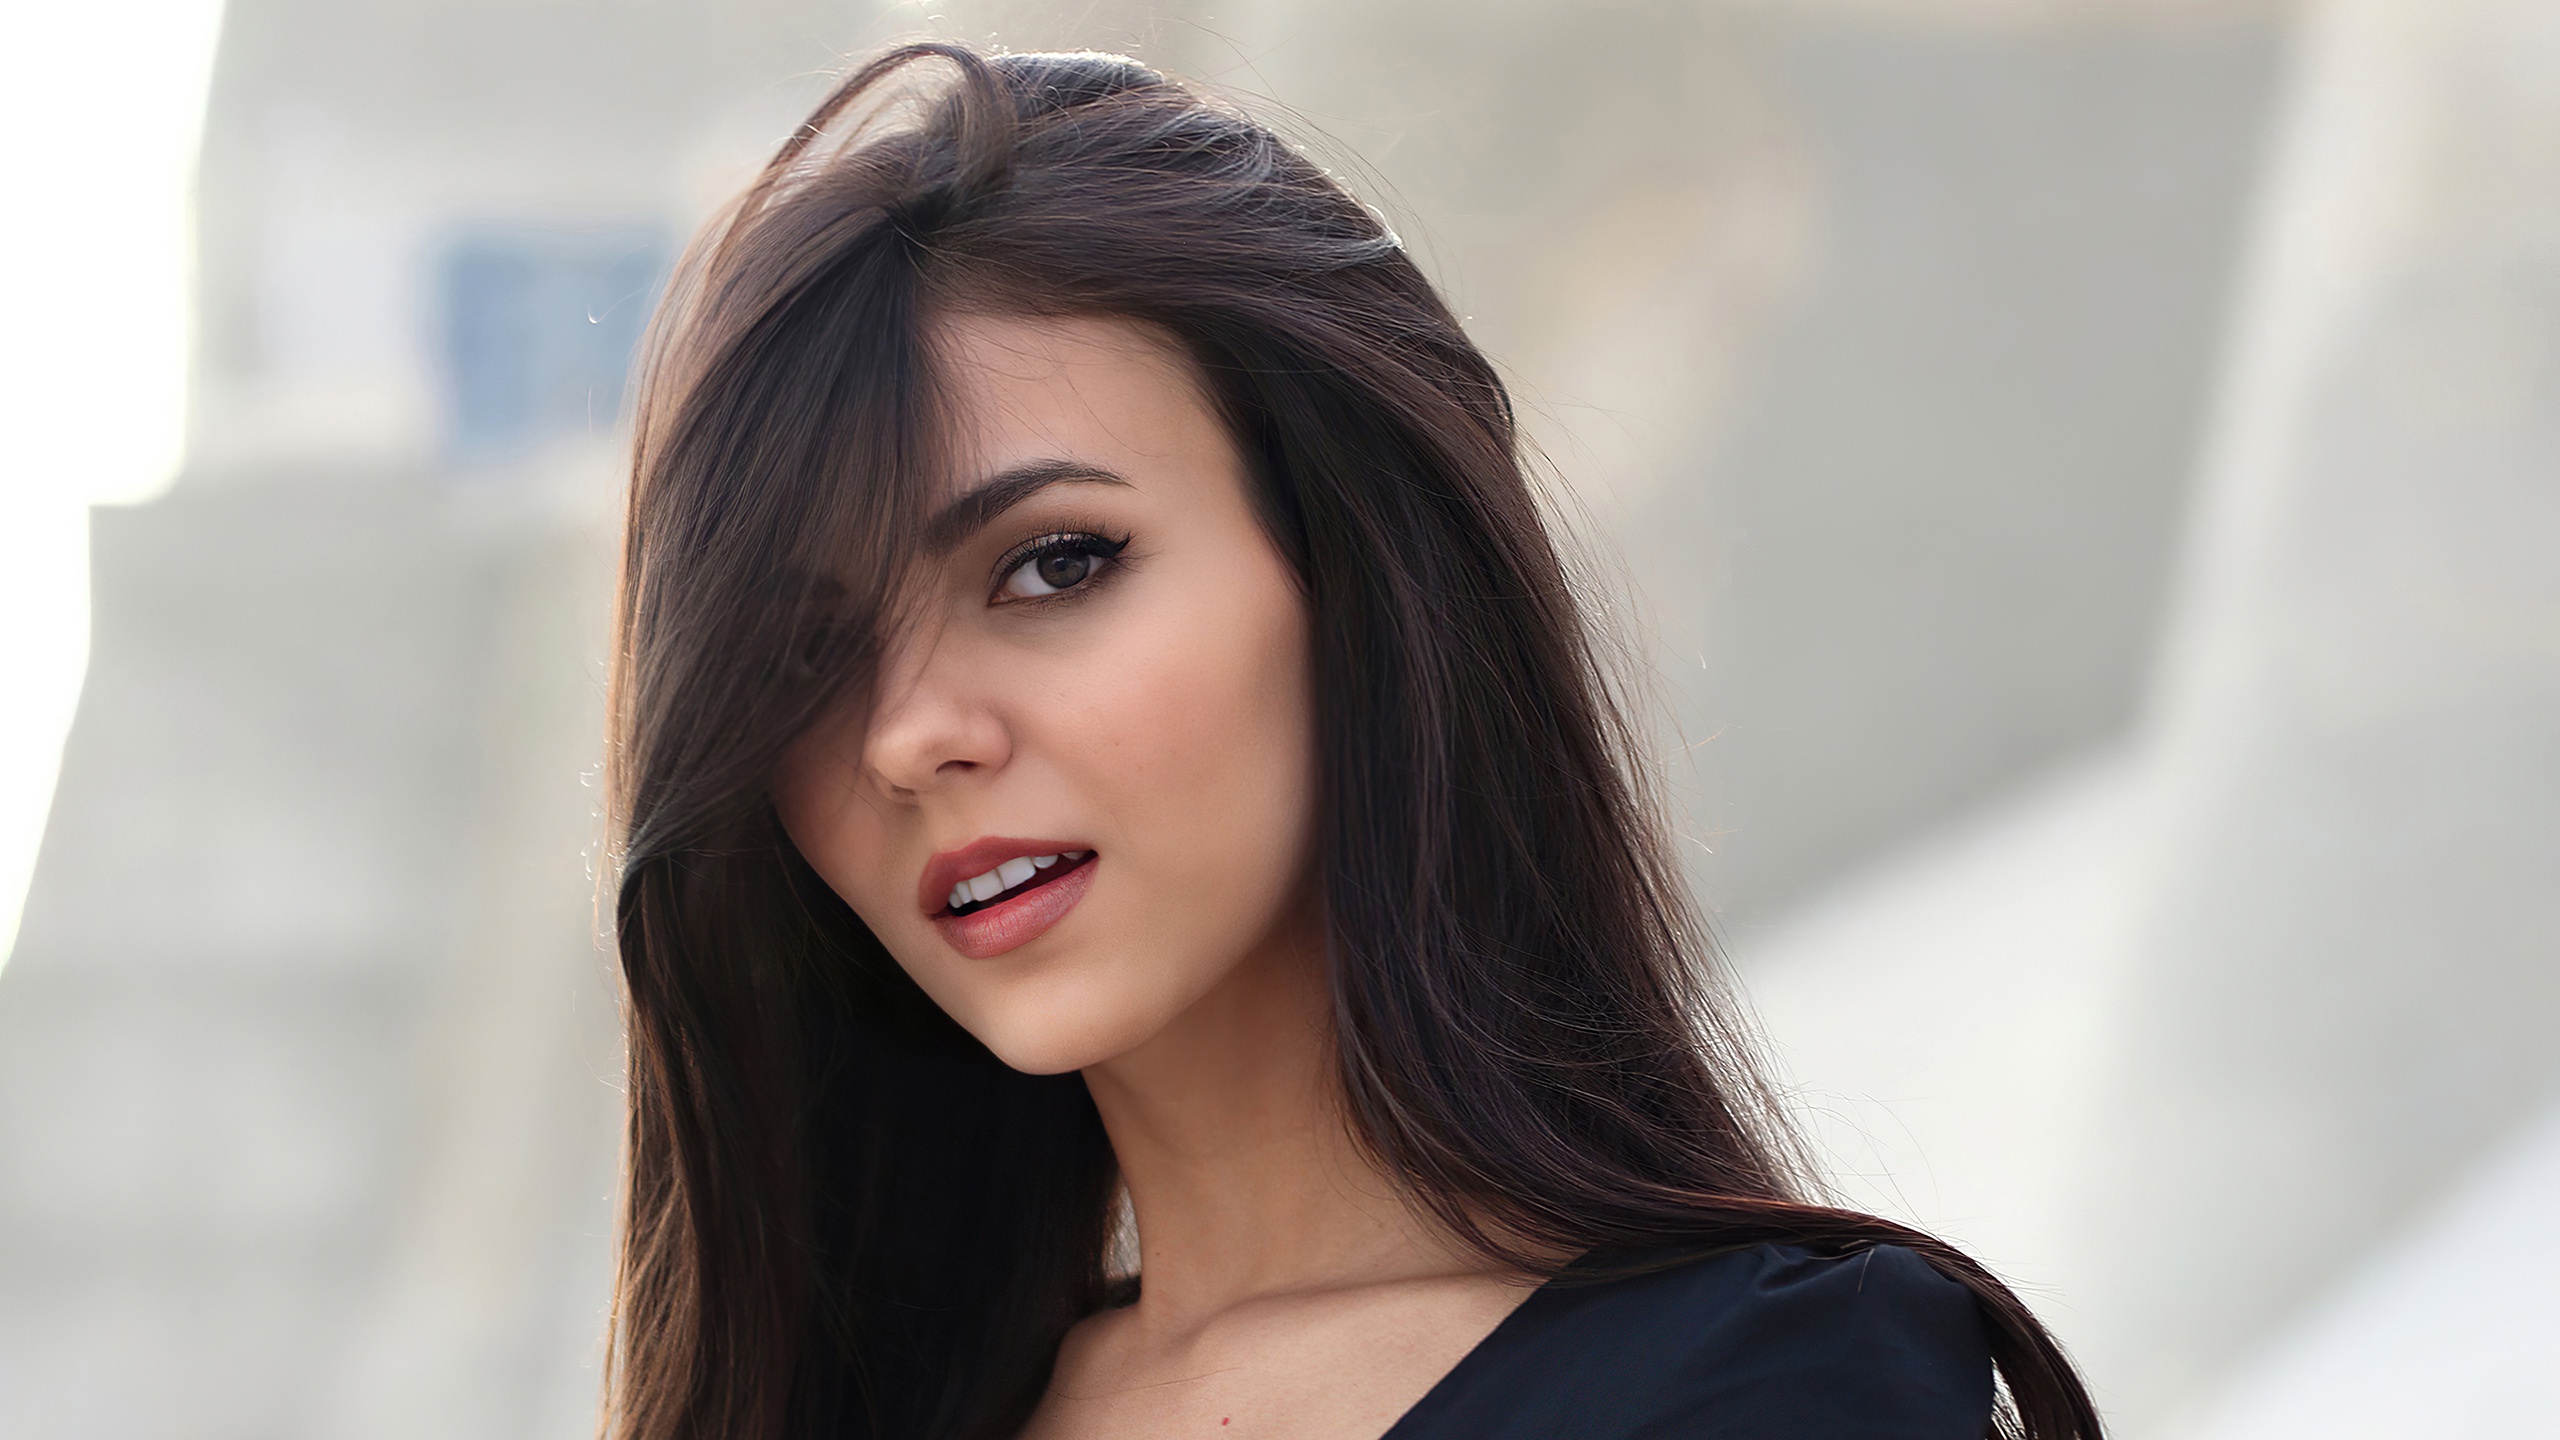 Model Face Red Lipstick Black Dress Victoria Justice Hair In Face Portrait Brunette Open Mouth 2560x1440